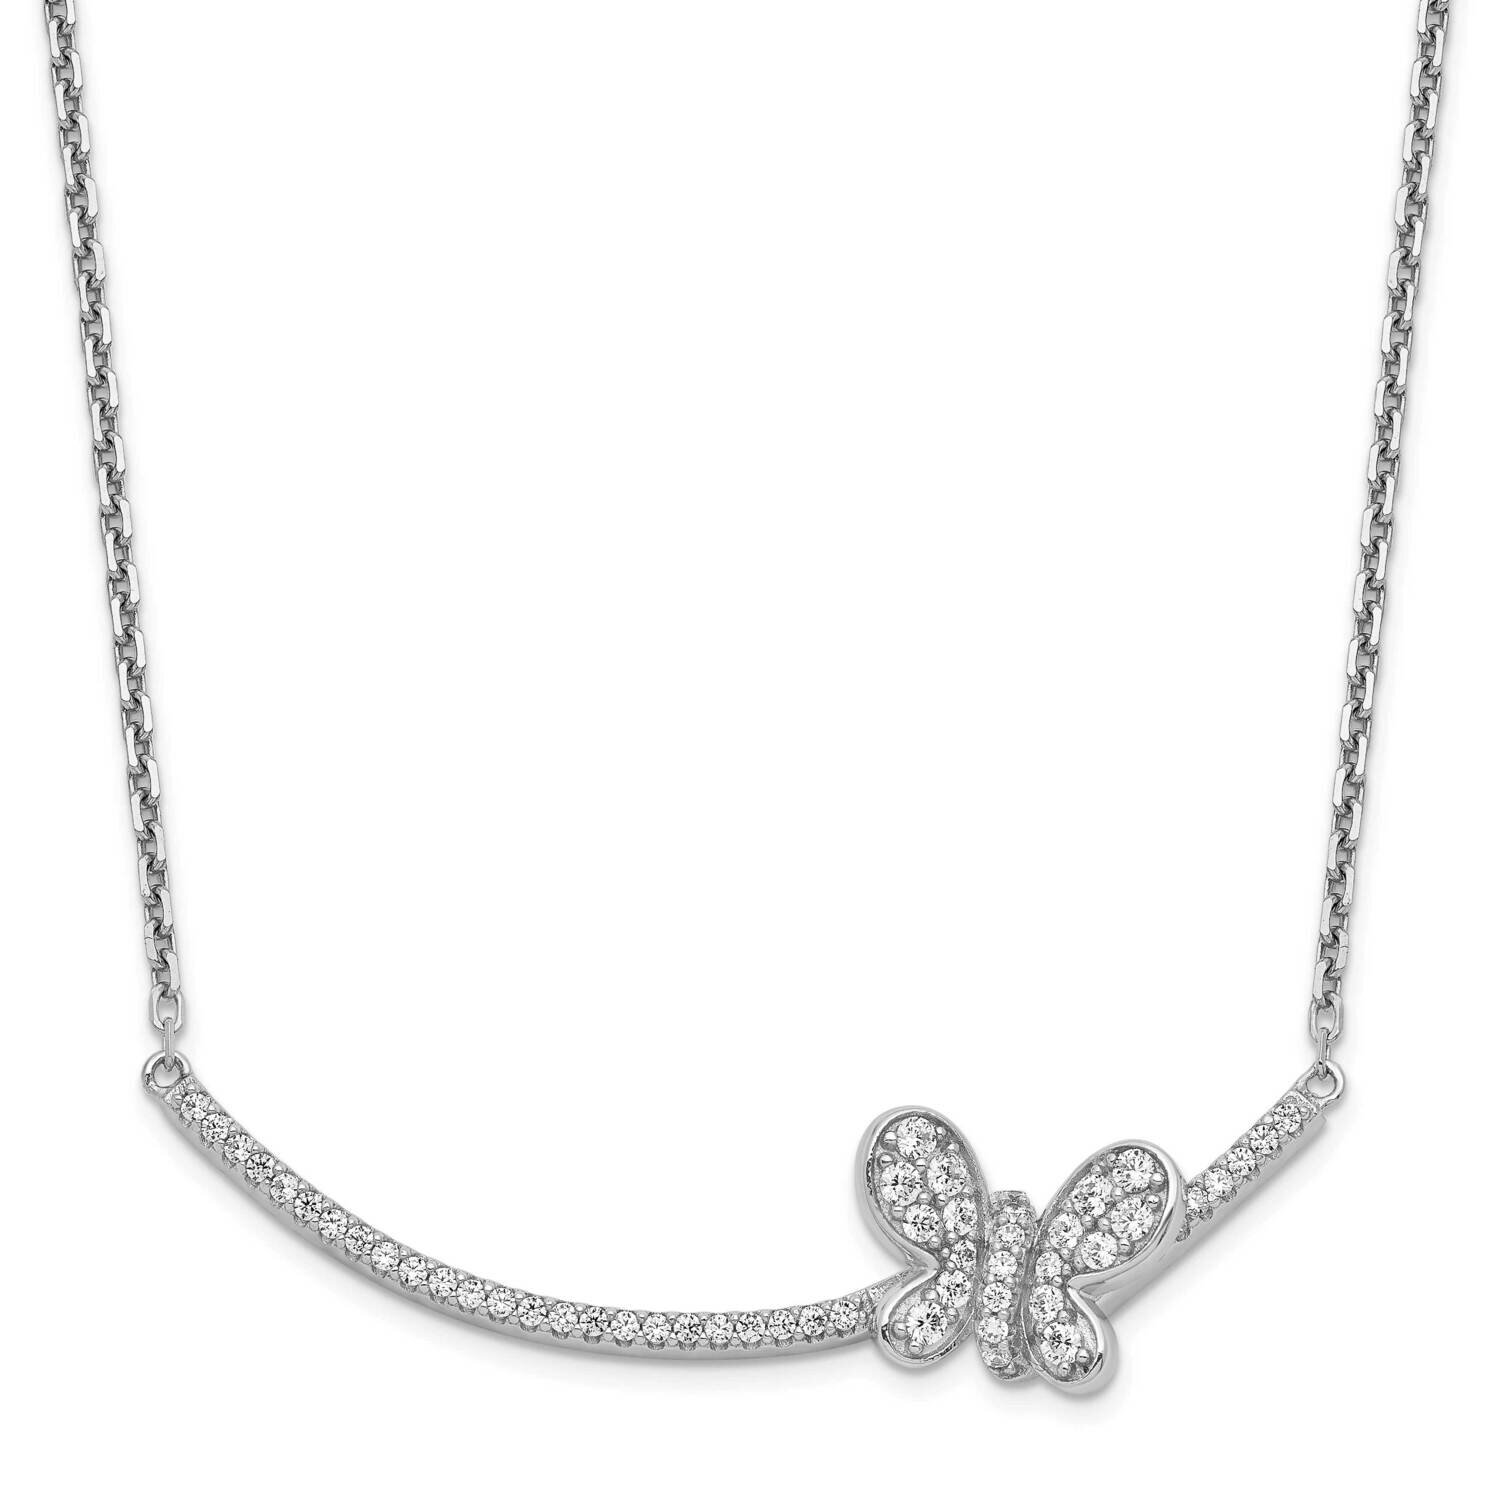 CZ Diamond Butterfly Bar 2 Inch Extender Necklace 16 Inch Sterling Silver Rhodium-Plated QG6147-16